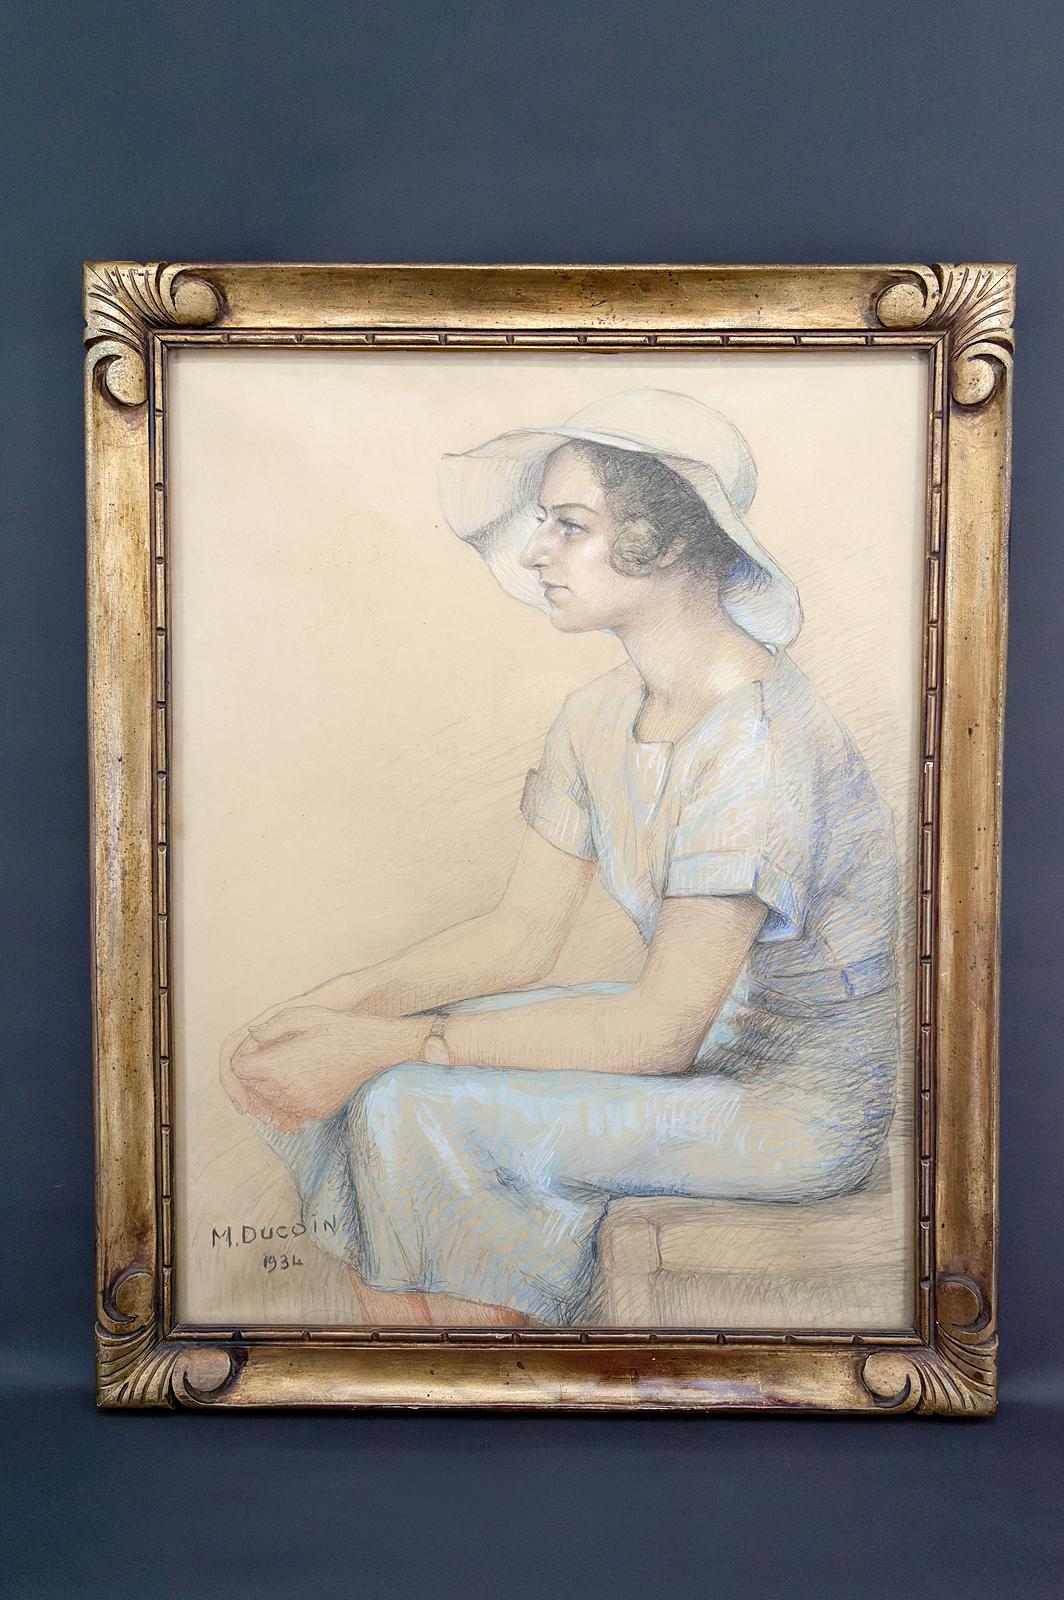 Portrait of a young woman, drawing / pastel framed under glass.

By M.Ducoin, signed and dated.
France, 1934.
Art Deco.

Gilded wooden frame from the same period as the work.
Framer's label: P.Chollet, 35 Rue d'Alsace Beaune.

Very good